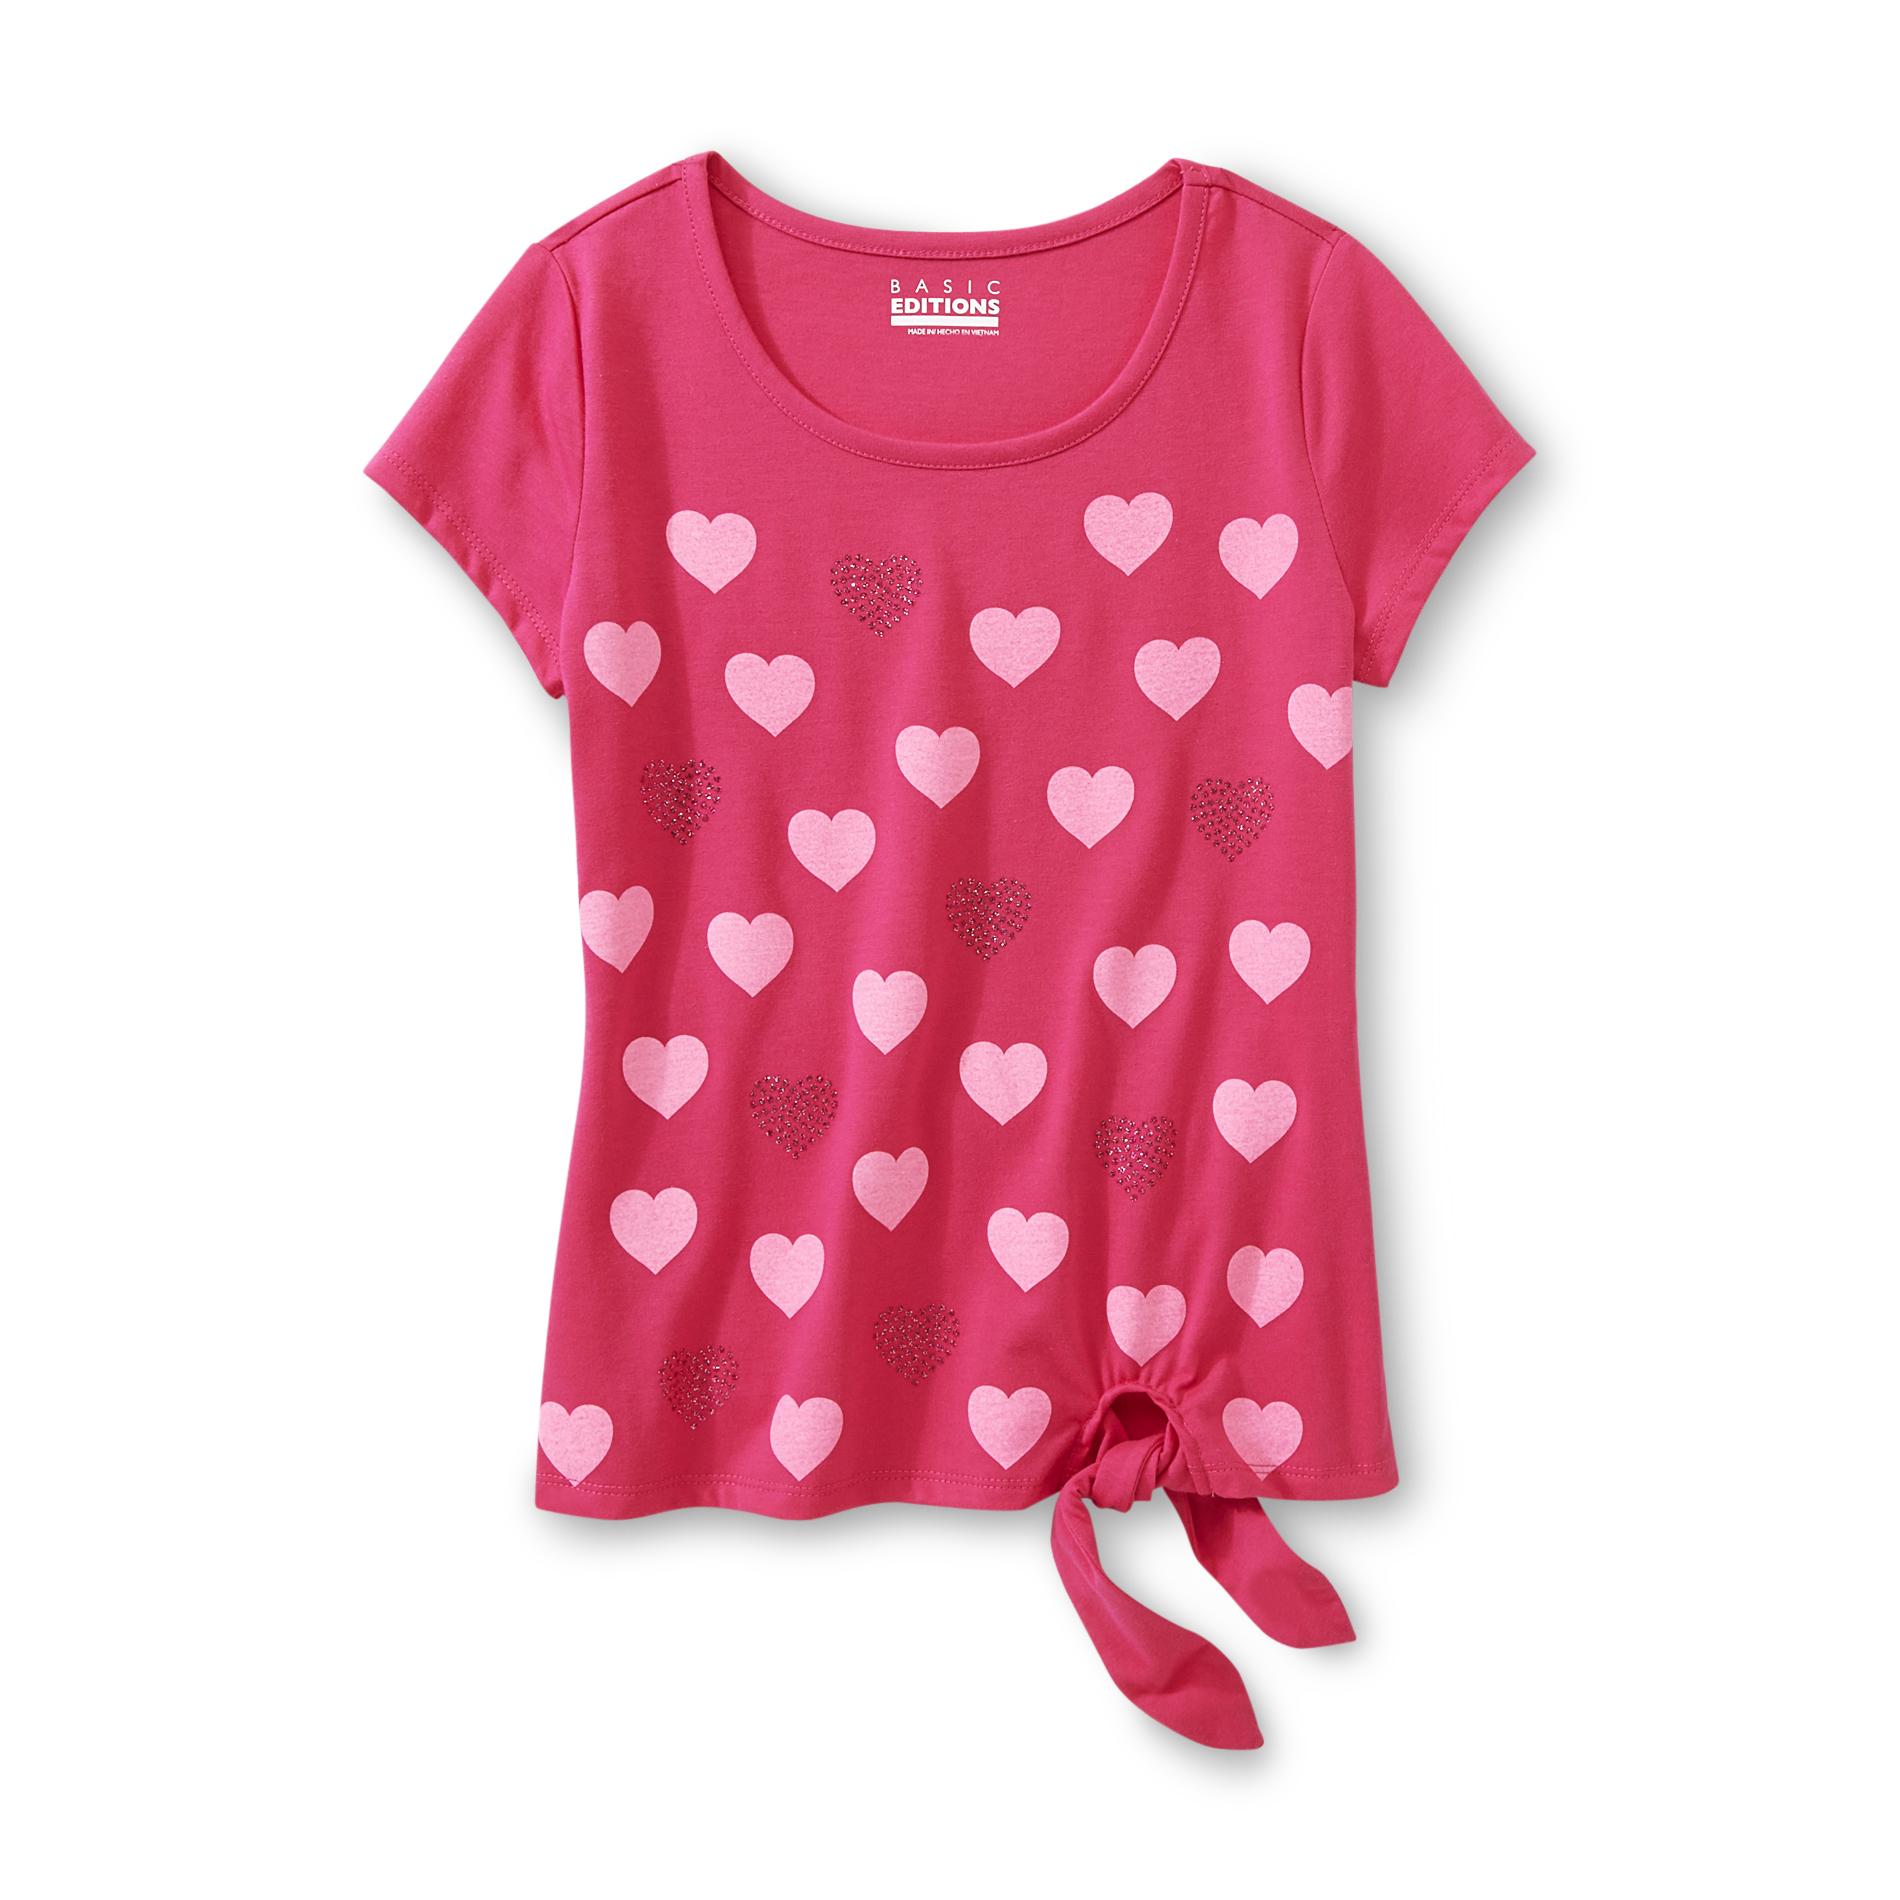 Basic Editions Girl's Spangled Tie-Front T-Shirt - Heart